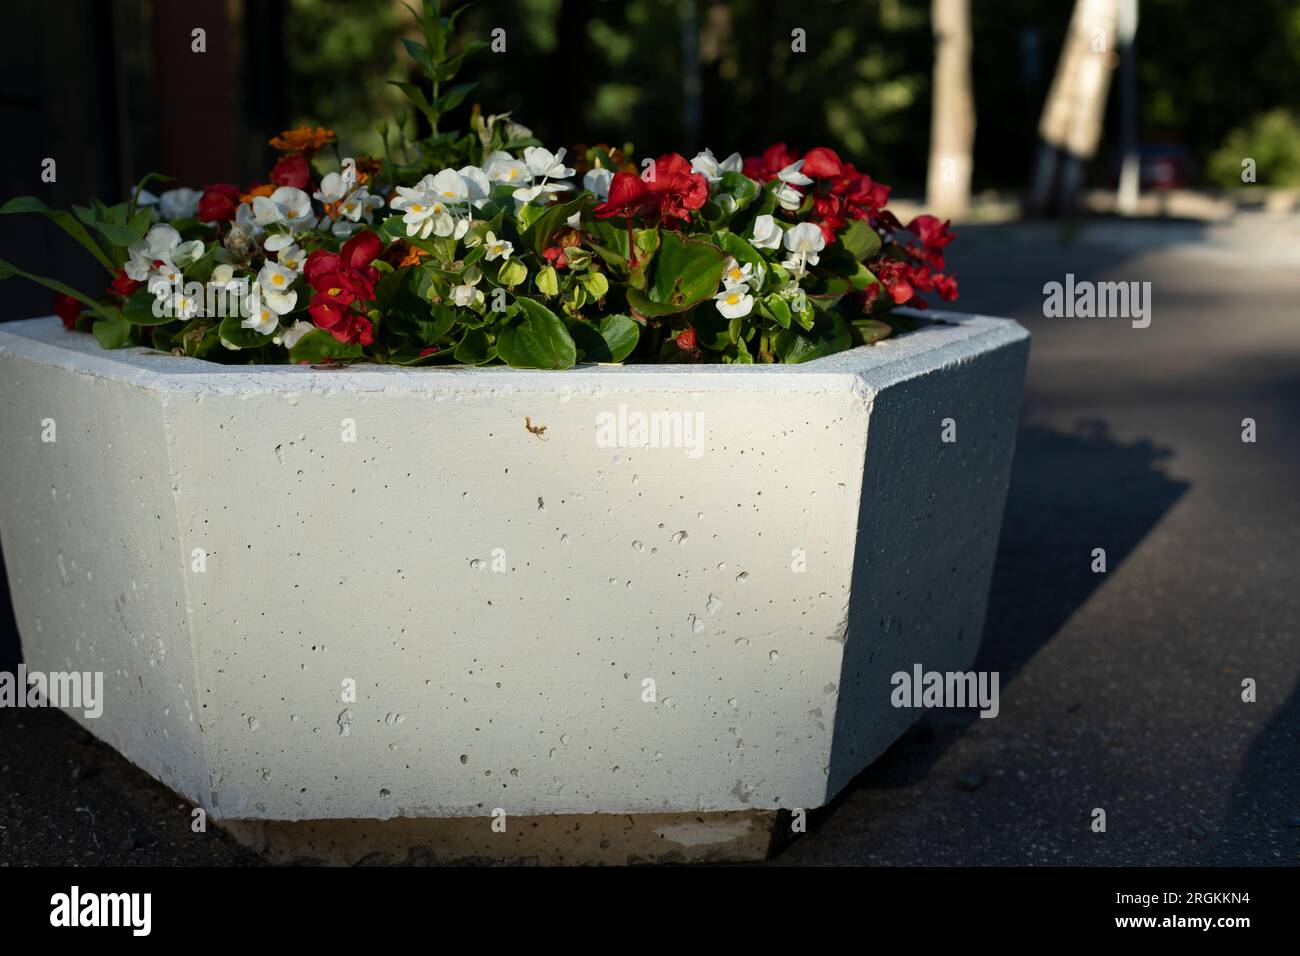 Flowers in flowerbed. City flowers in park. Concrete bowl for earth and seedlings. Architectural element in park. Stock Photo